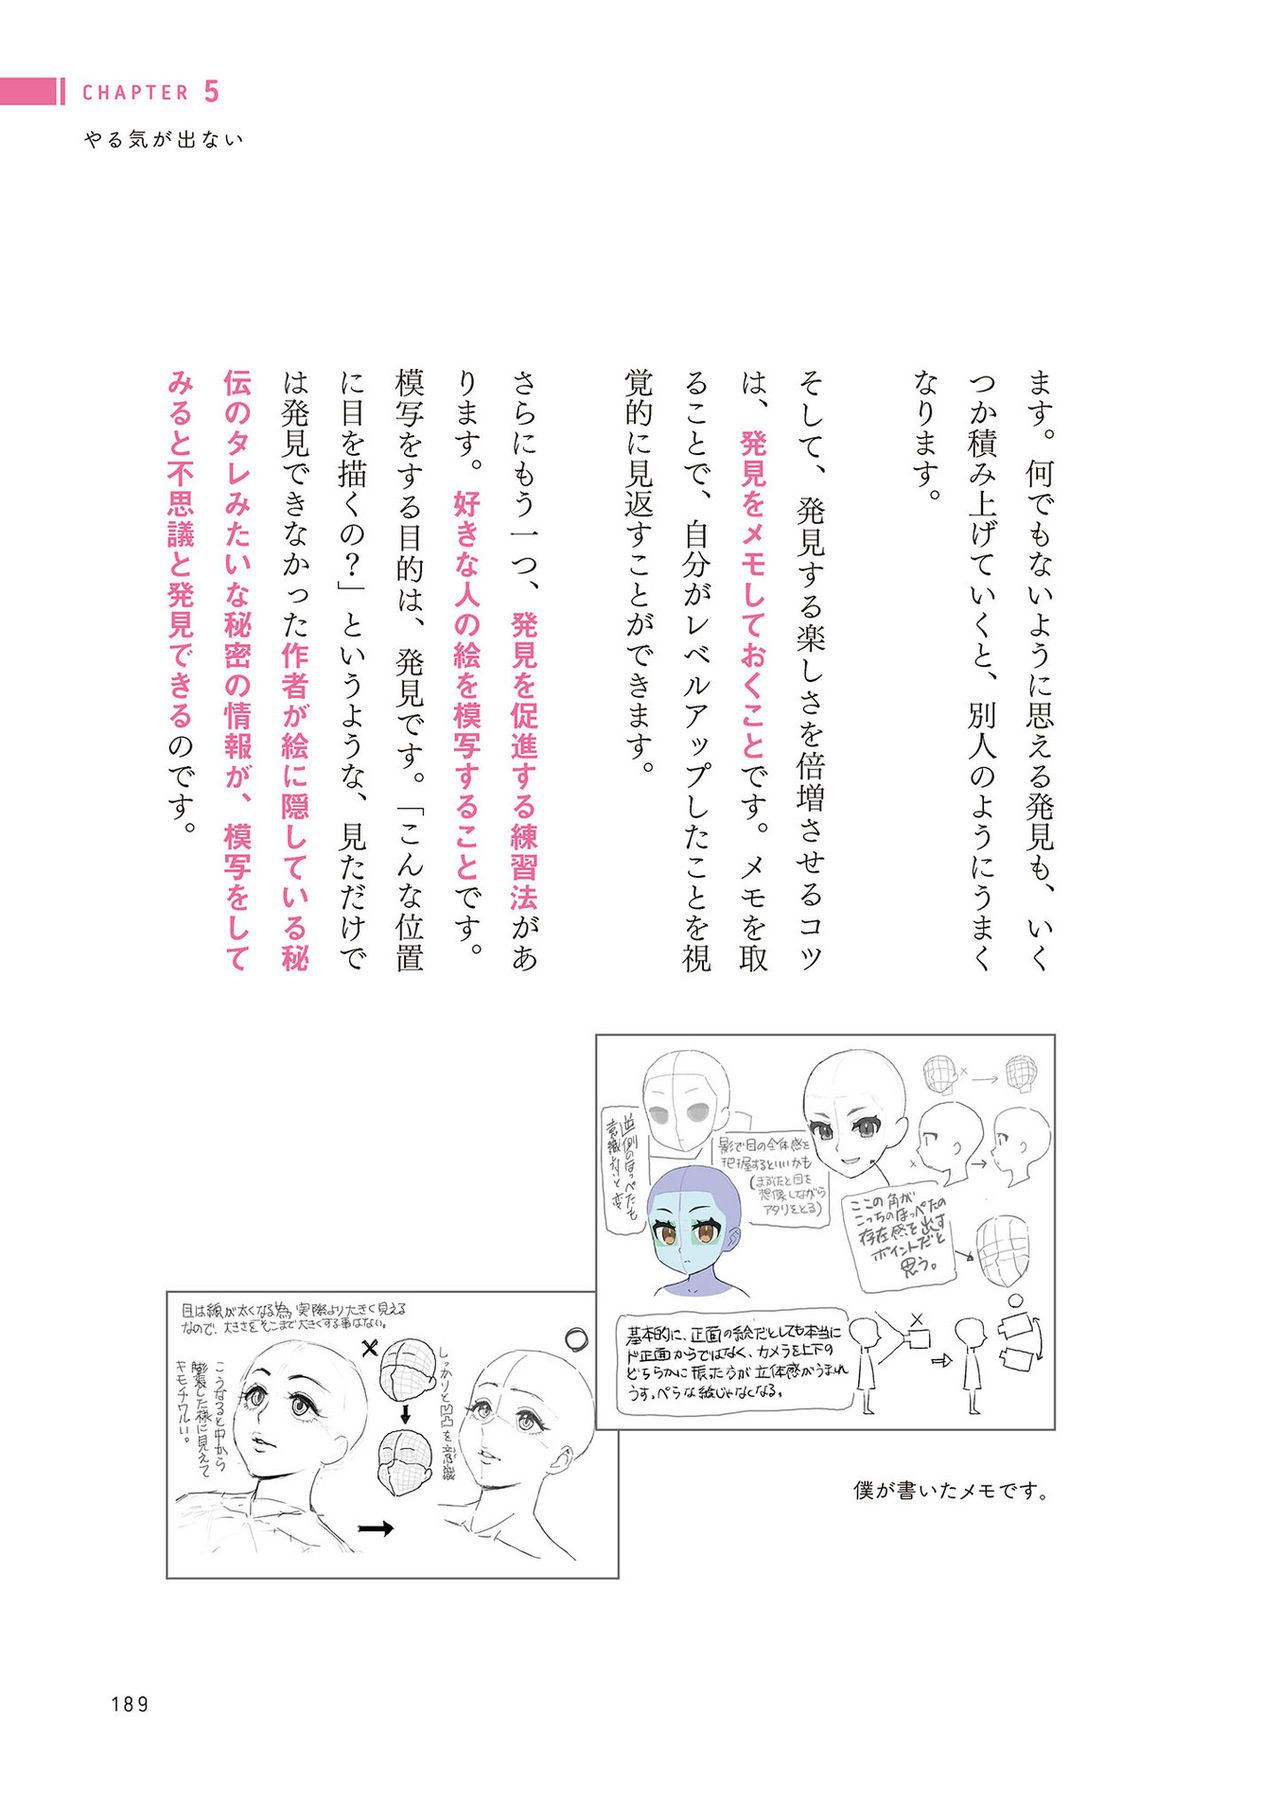 Prohibition of drawing well How to improve illustrations that are not smooth うまく描くの禁止 ツラくないイラスト上達法 190